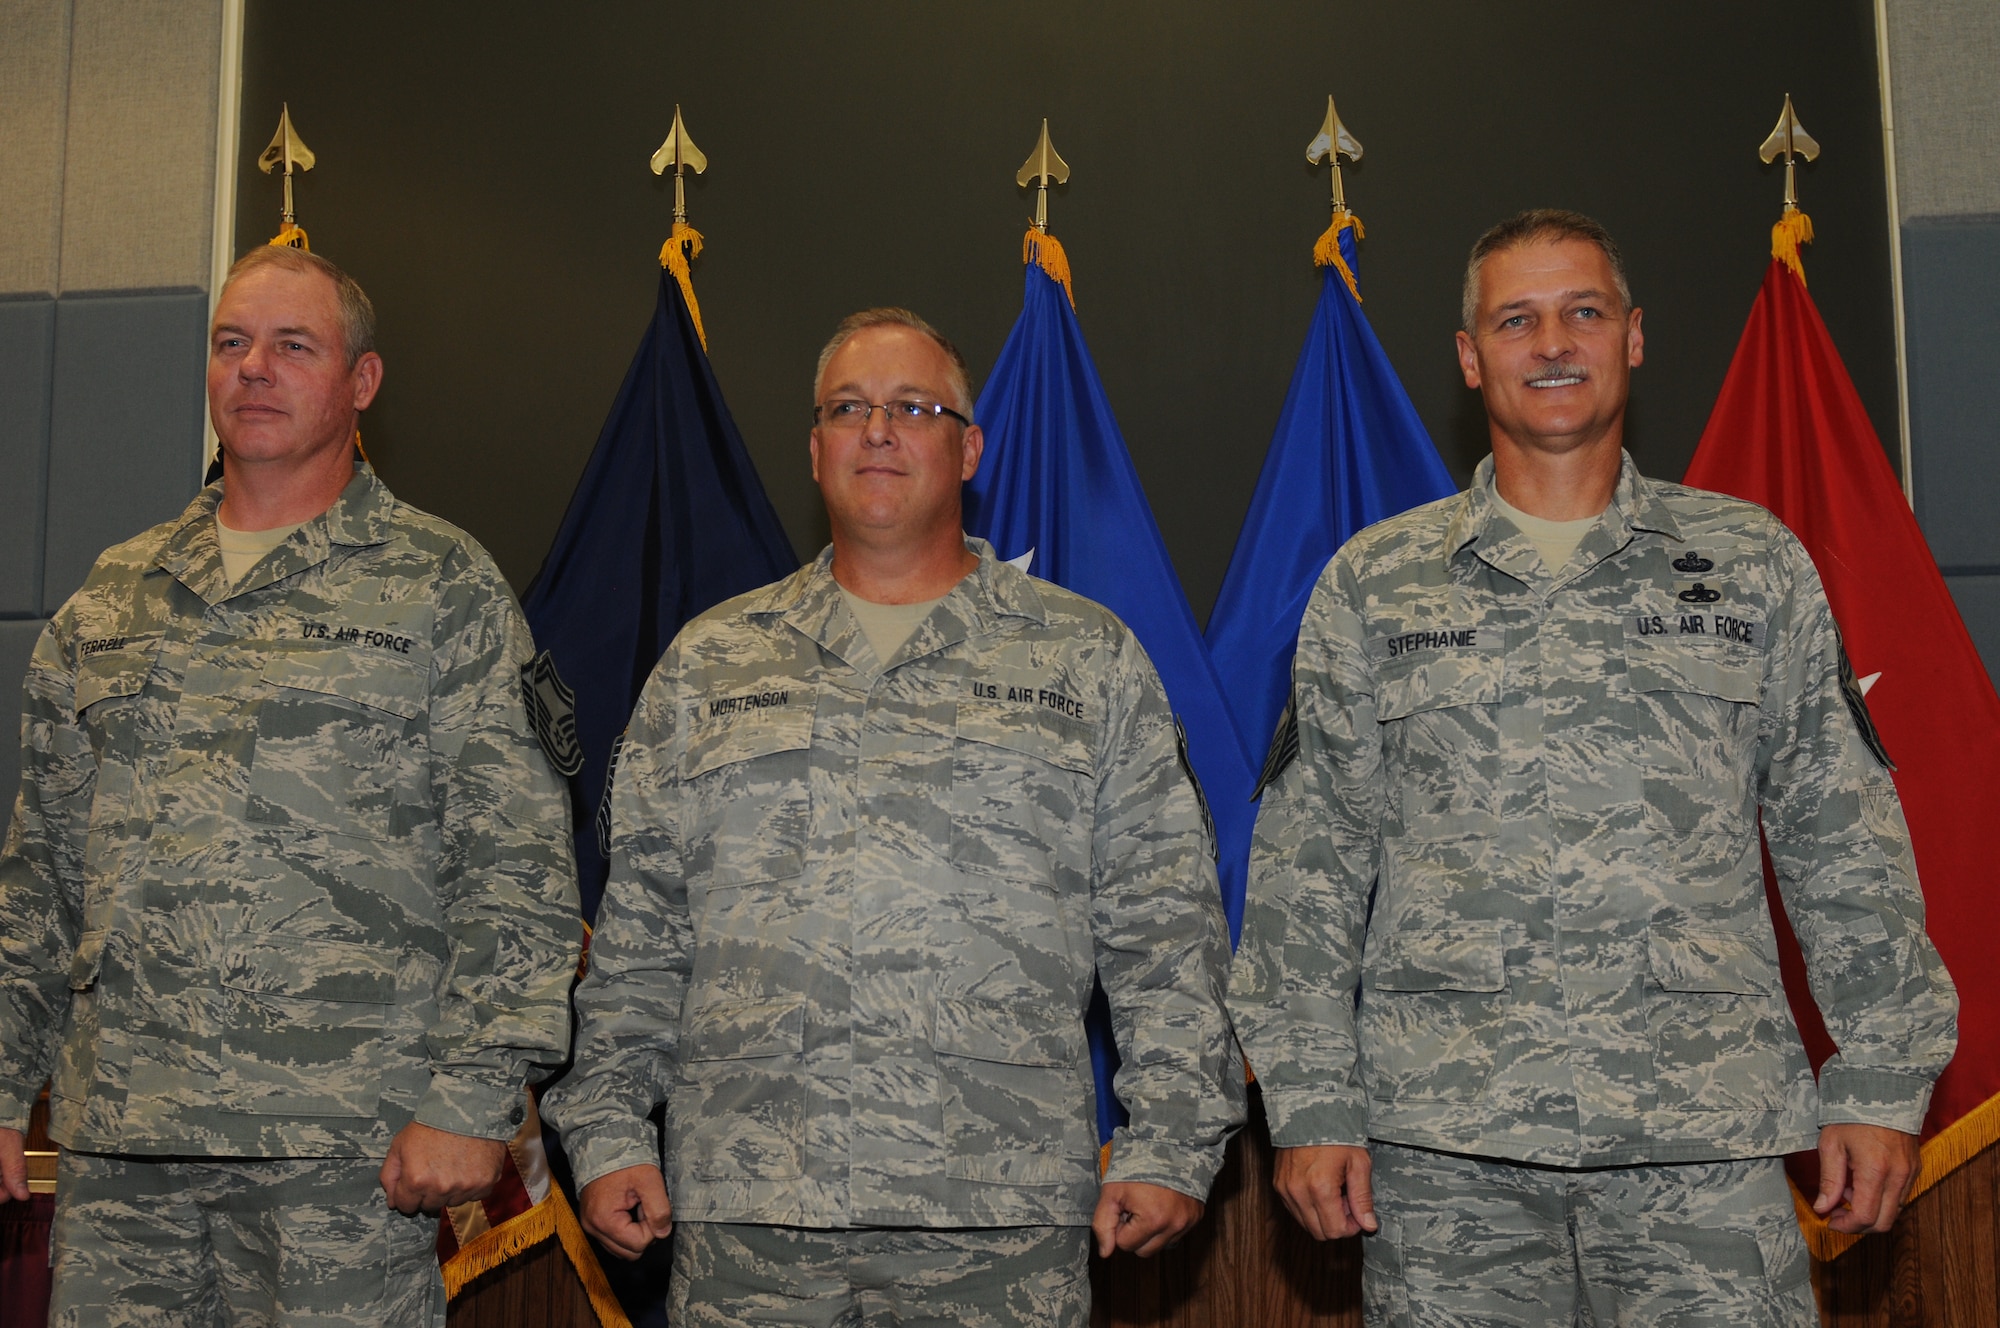 Newly promoted members of the Idaho Air National Guard on Sept. 9 at Gowen Field. (left to right) Senior Master Sgt. William Ferrell from Idaho Air National Guard Recruiting and Retention Office. Chief Master Sgt. Tracy Mortenson from the Idaho Air National Guard Human Resource Office. Chief Master Sgt. Steven Stephanie from the 266 Range Squadron.
